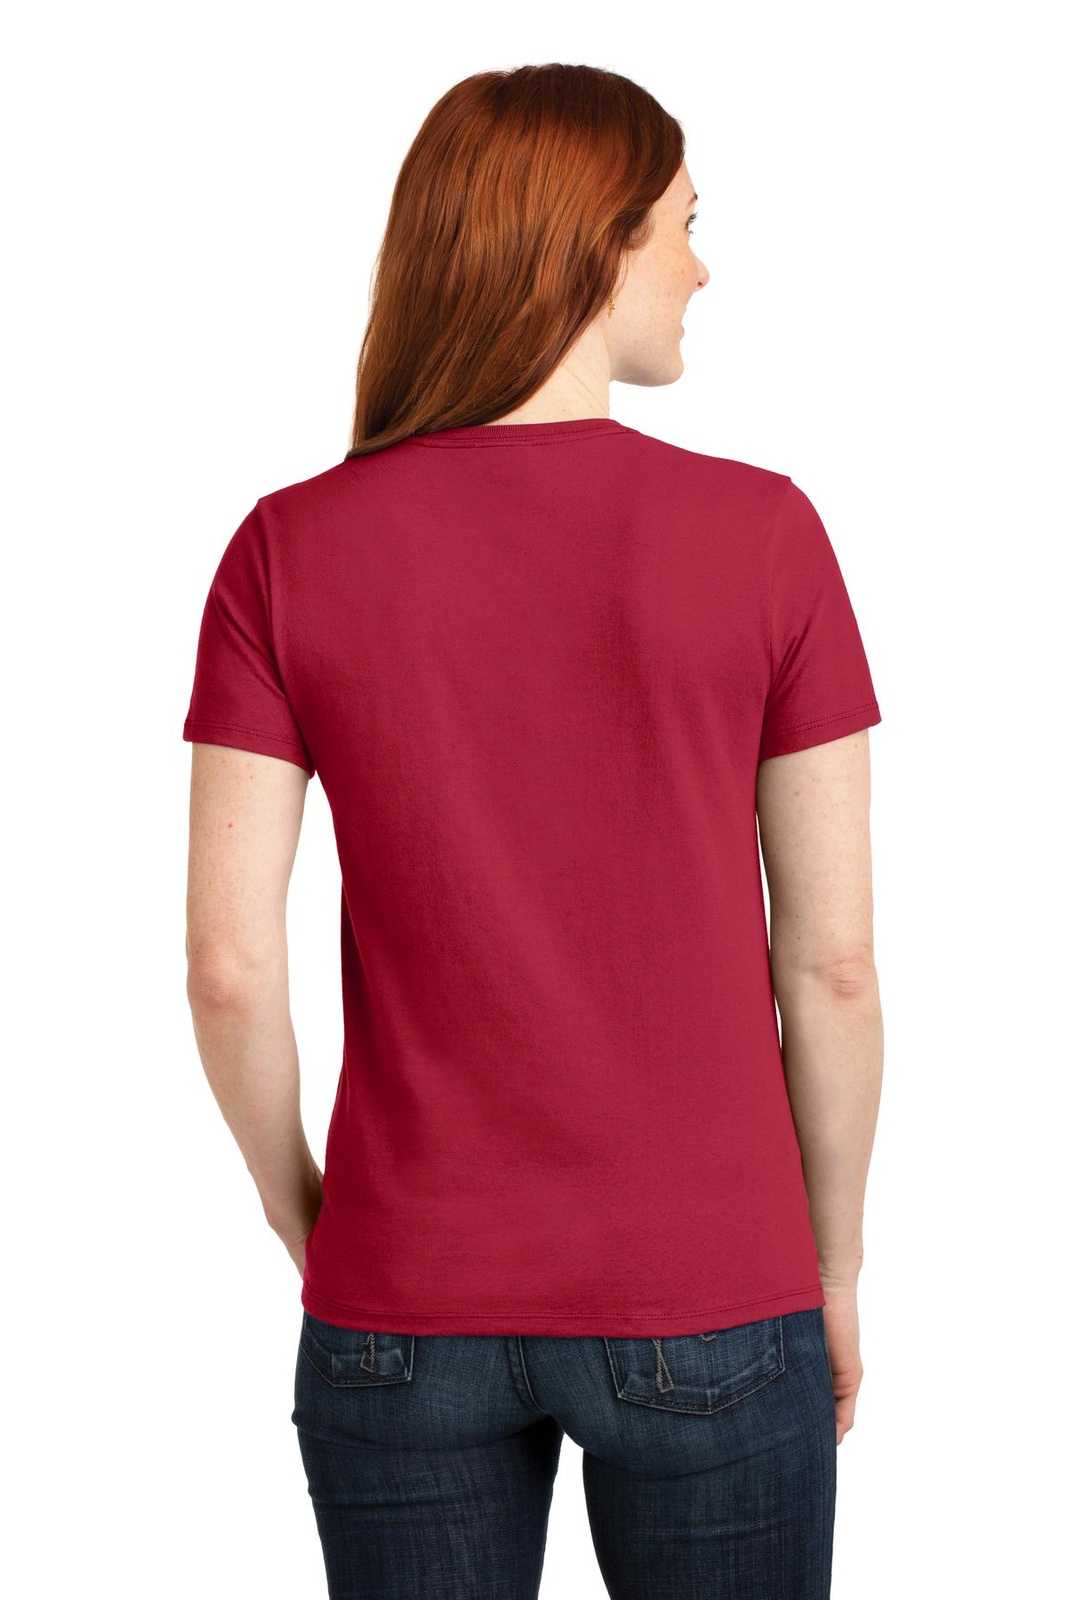 Port &amp; Company LPC55 Ladies Core Blend Tee - Red - HIT a Double - 2